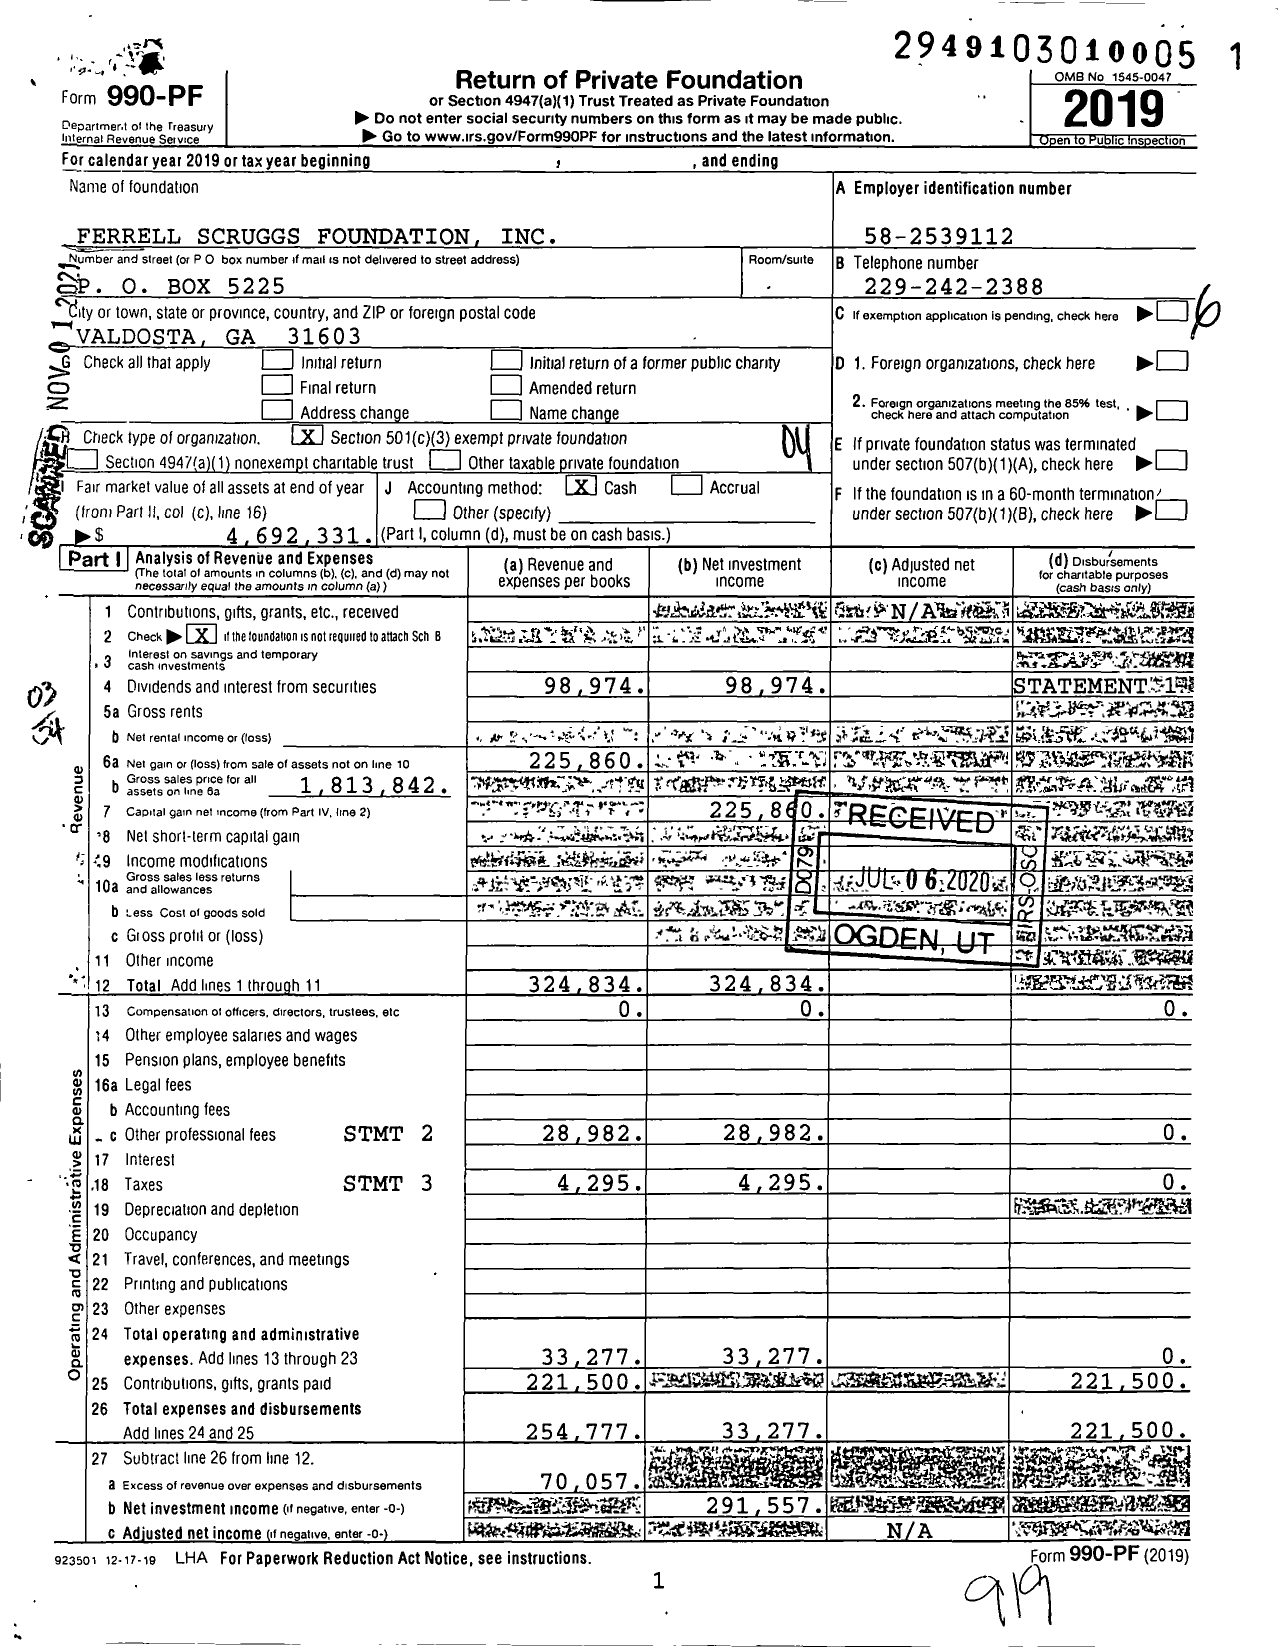 Image of first page of 2019 Form 990PF for Ferrell Scruggs Foundation